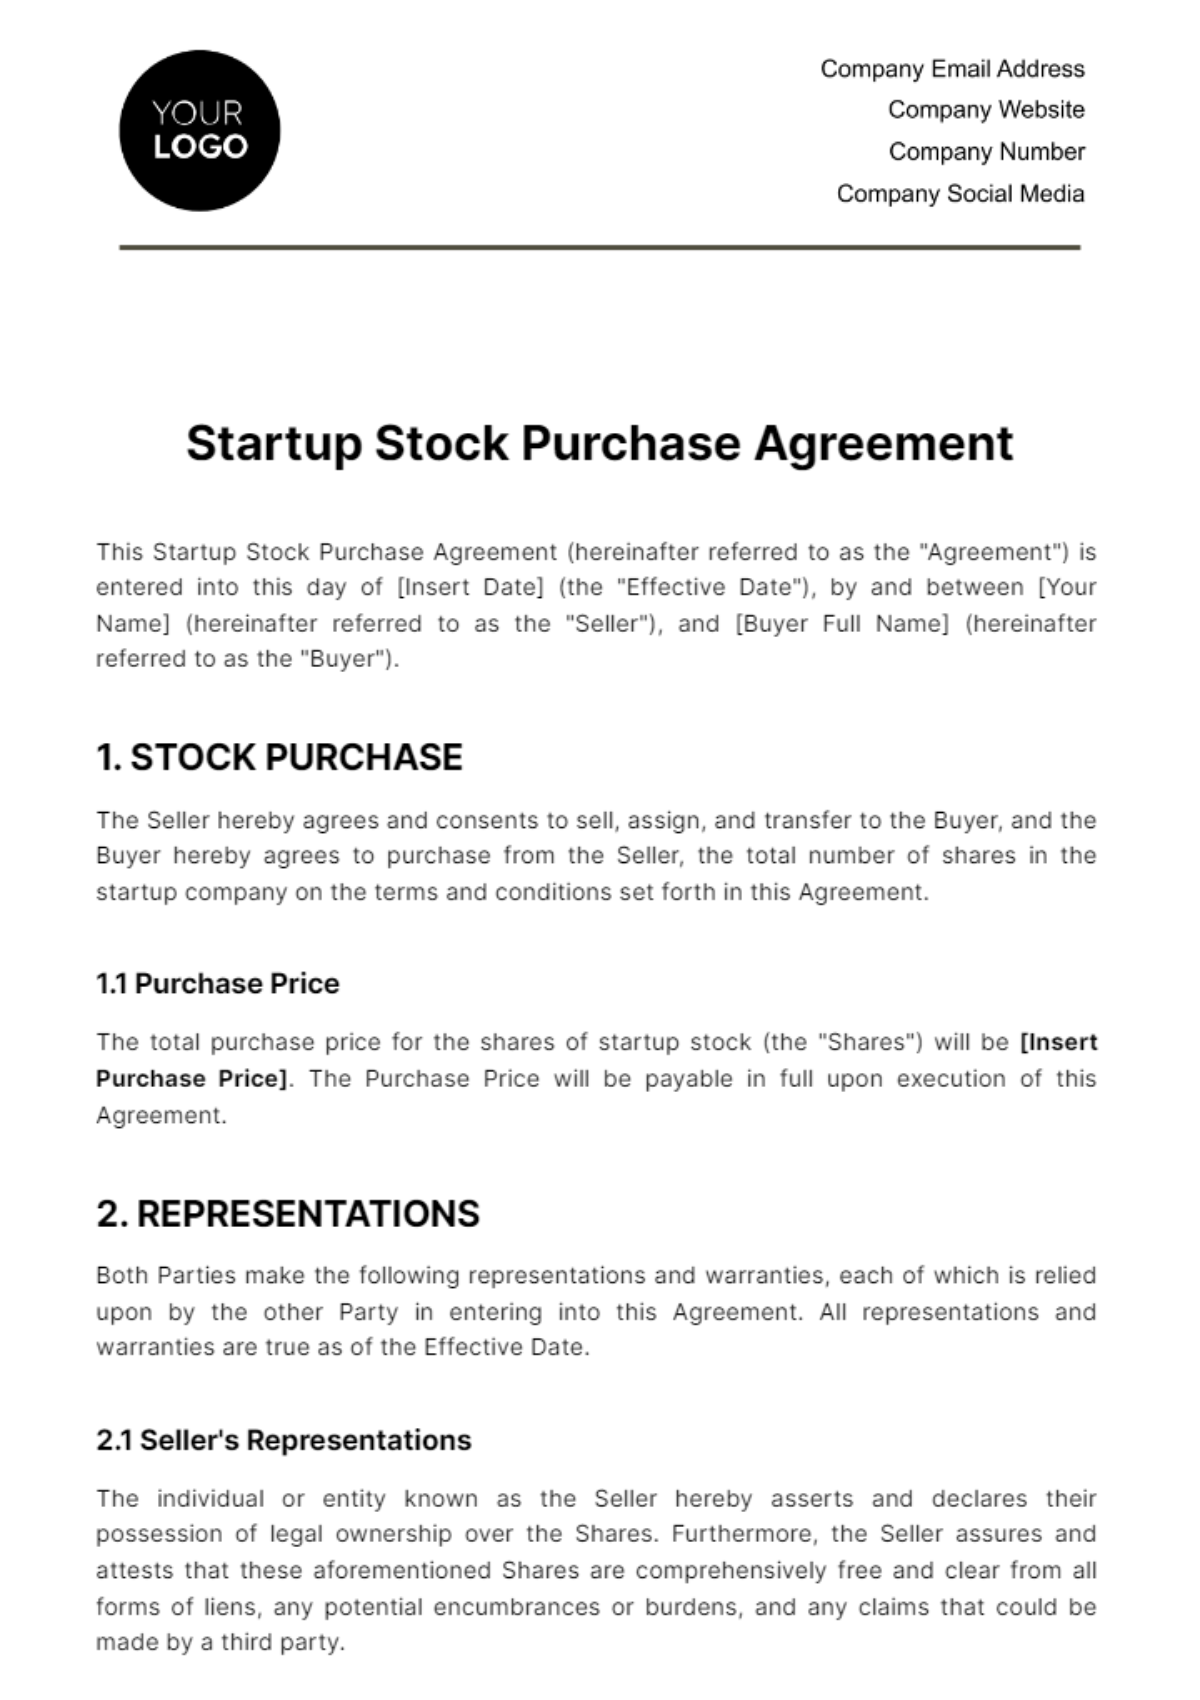 Startup Stock Purchase Agreement Template